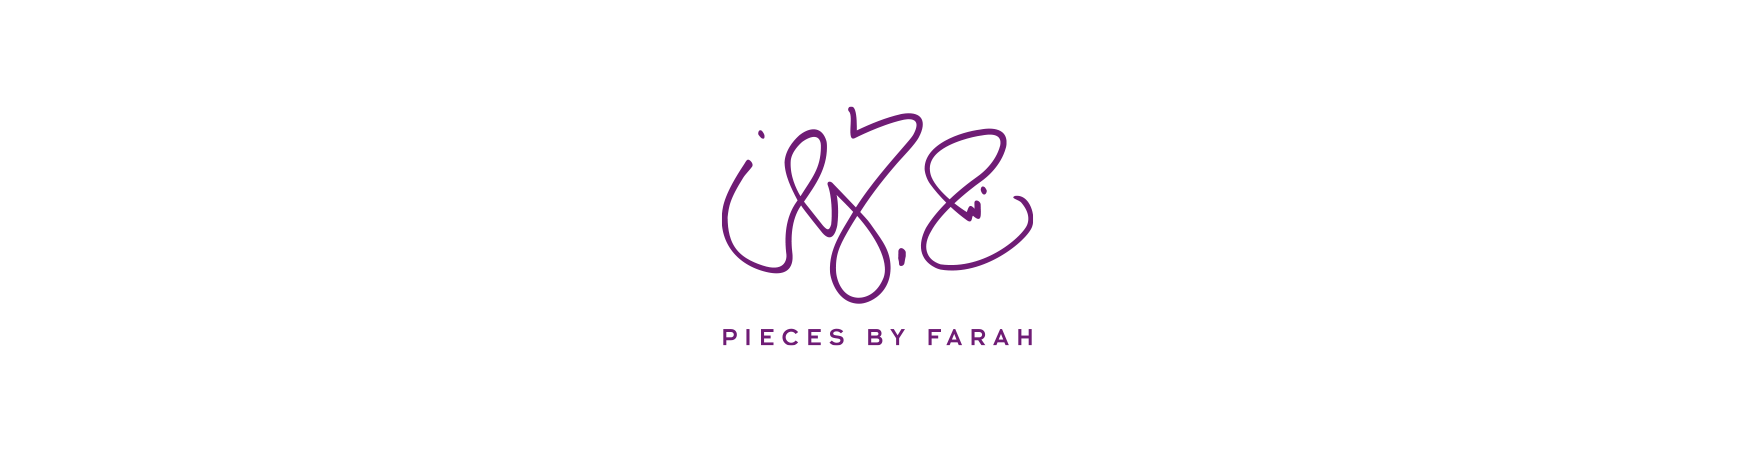 Pieces By Farah